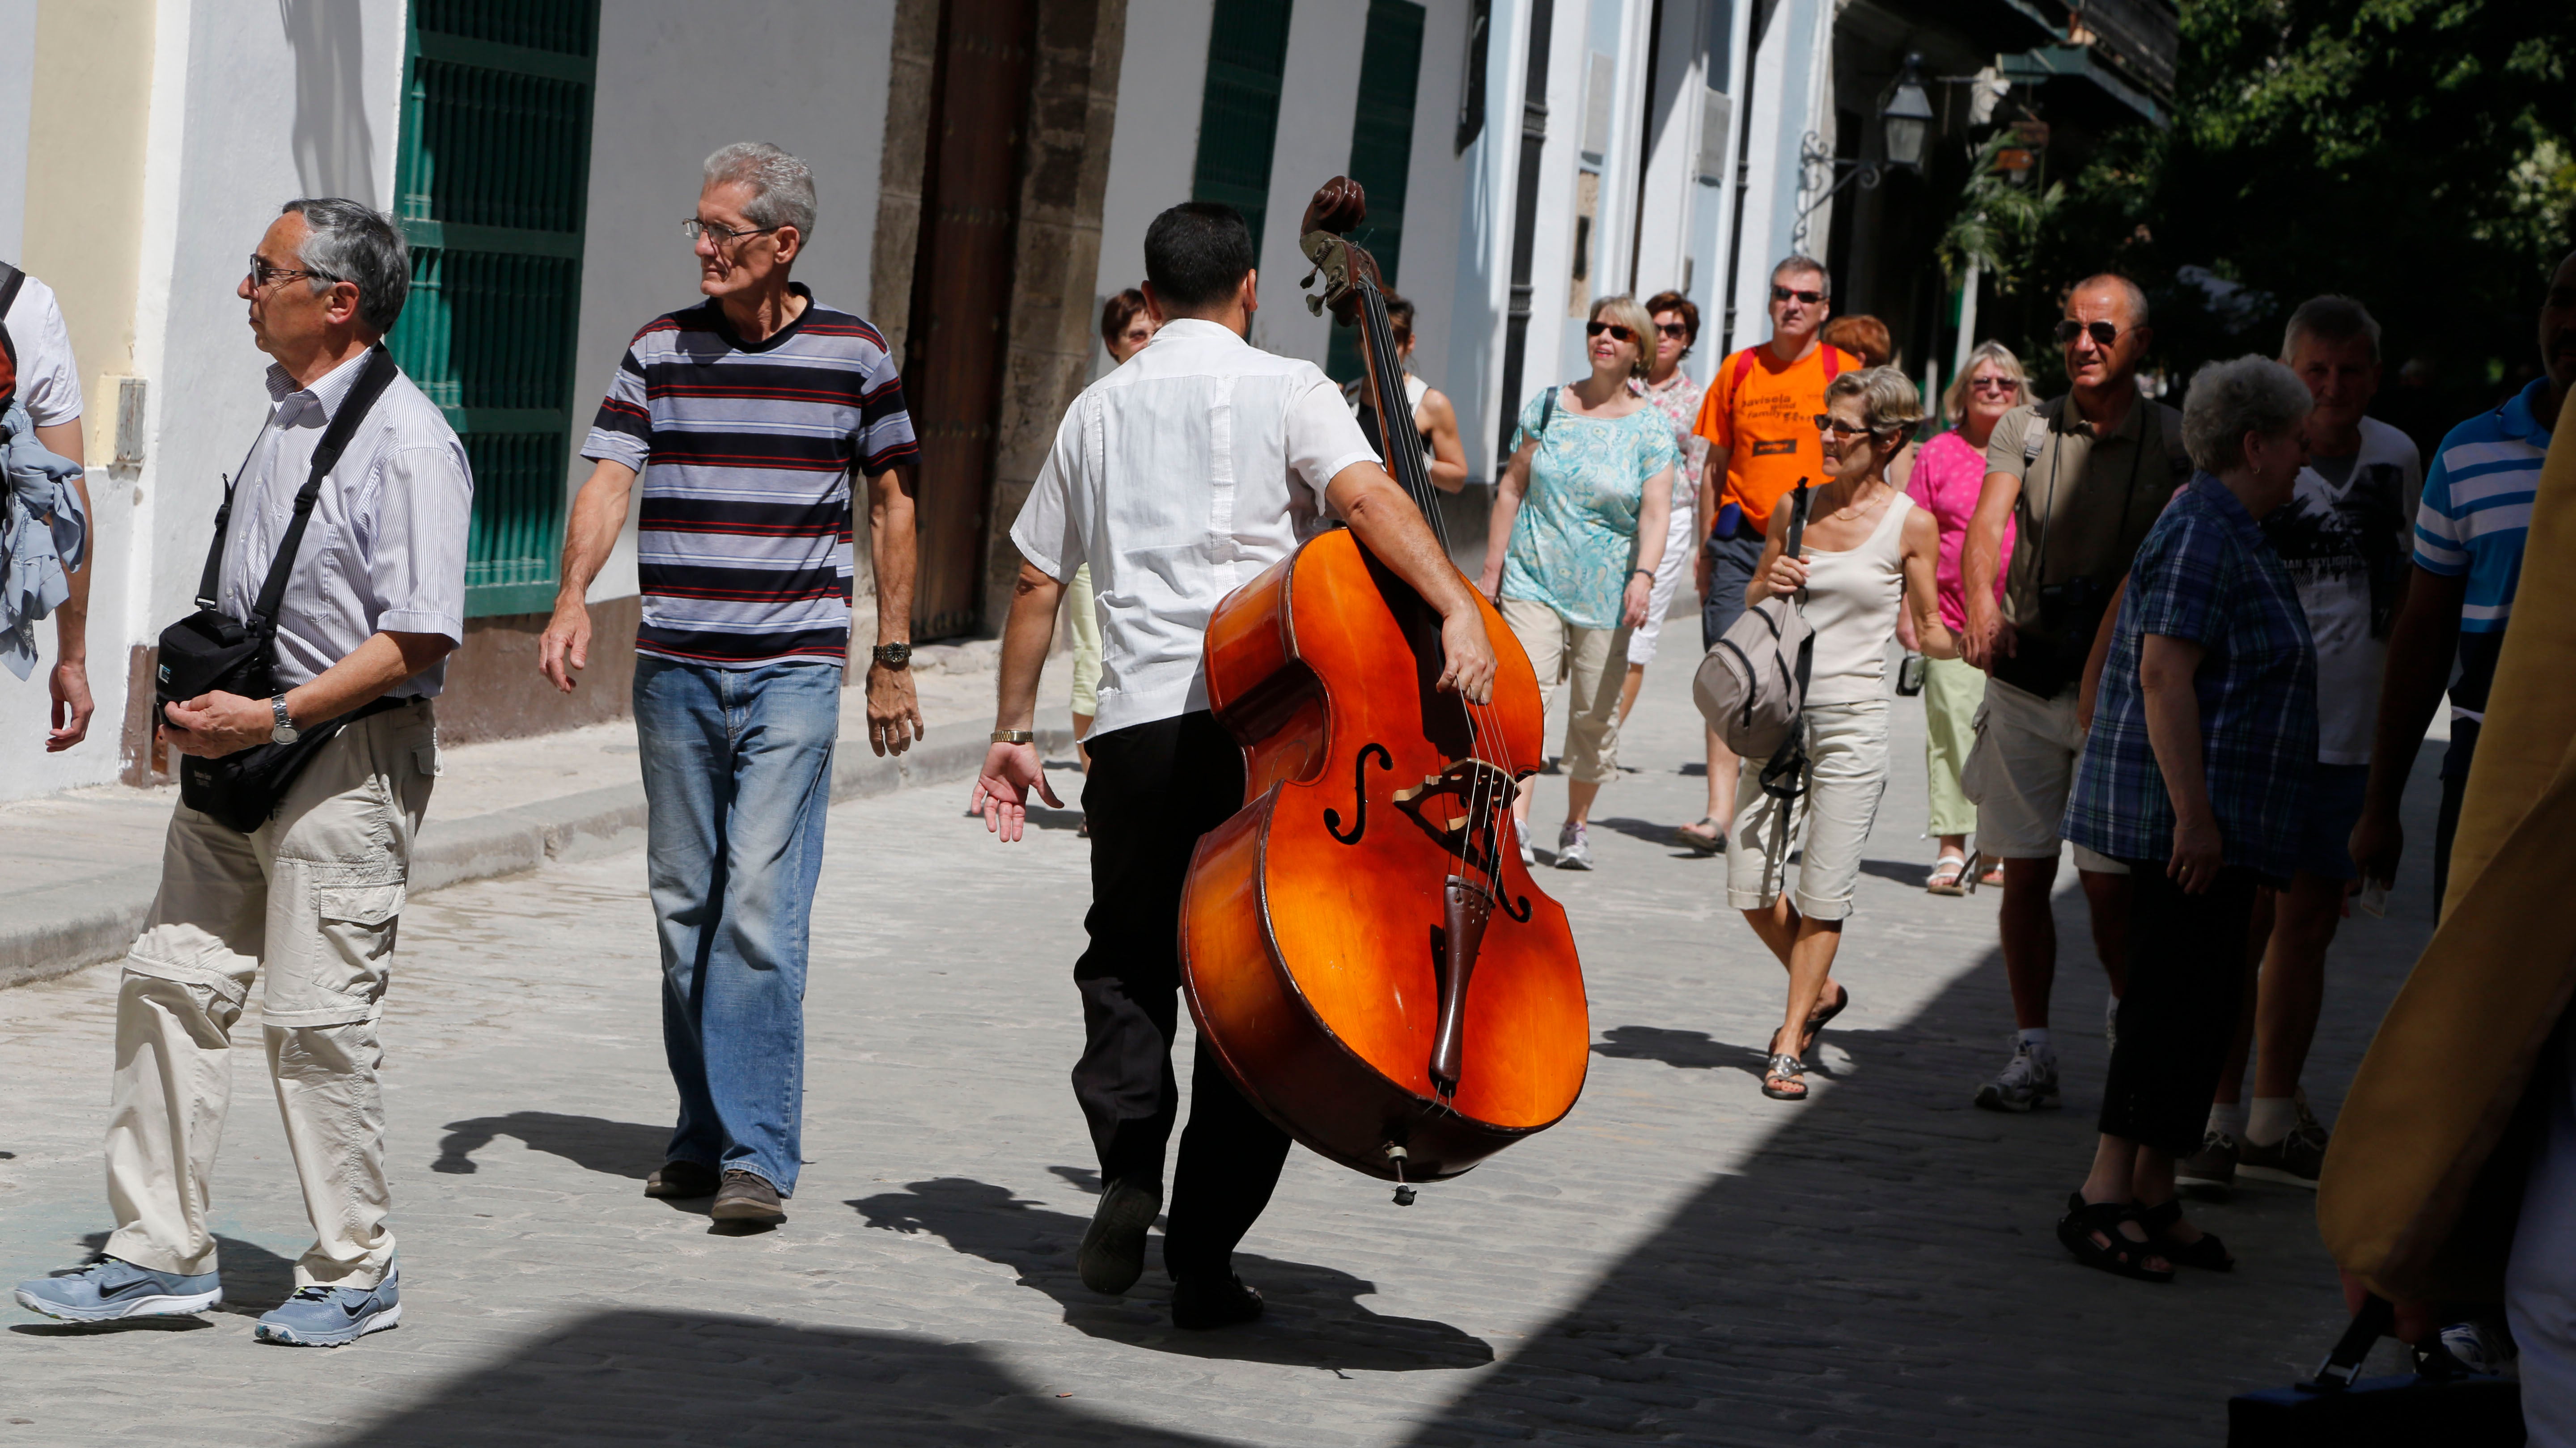 Travelers flock to Cuba before American invasion